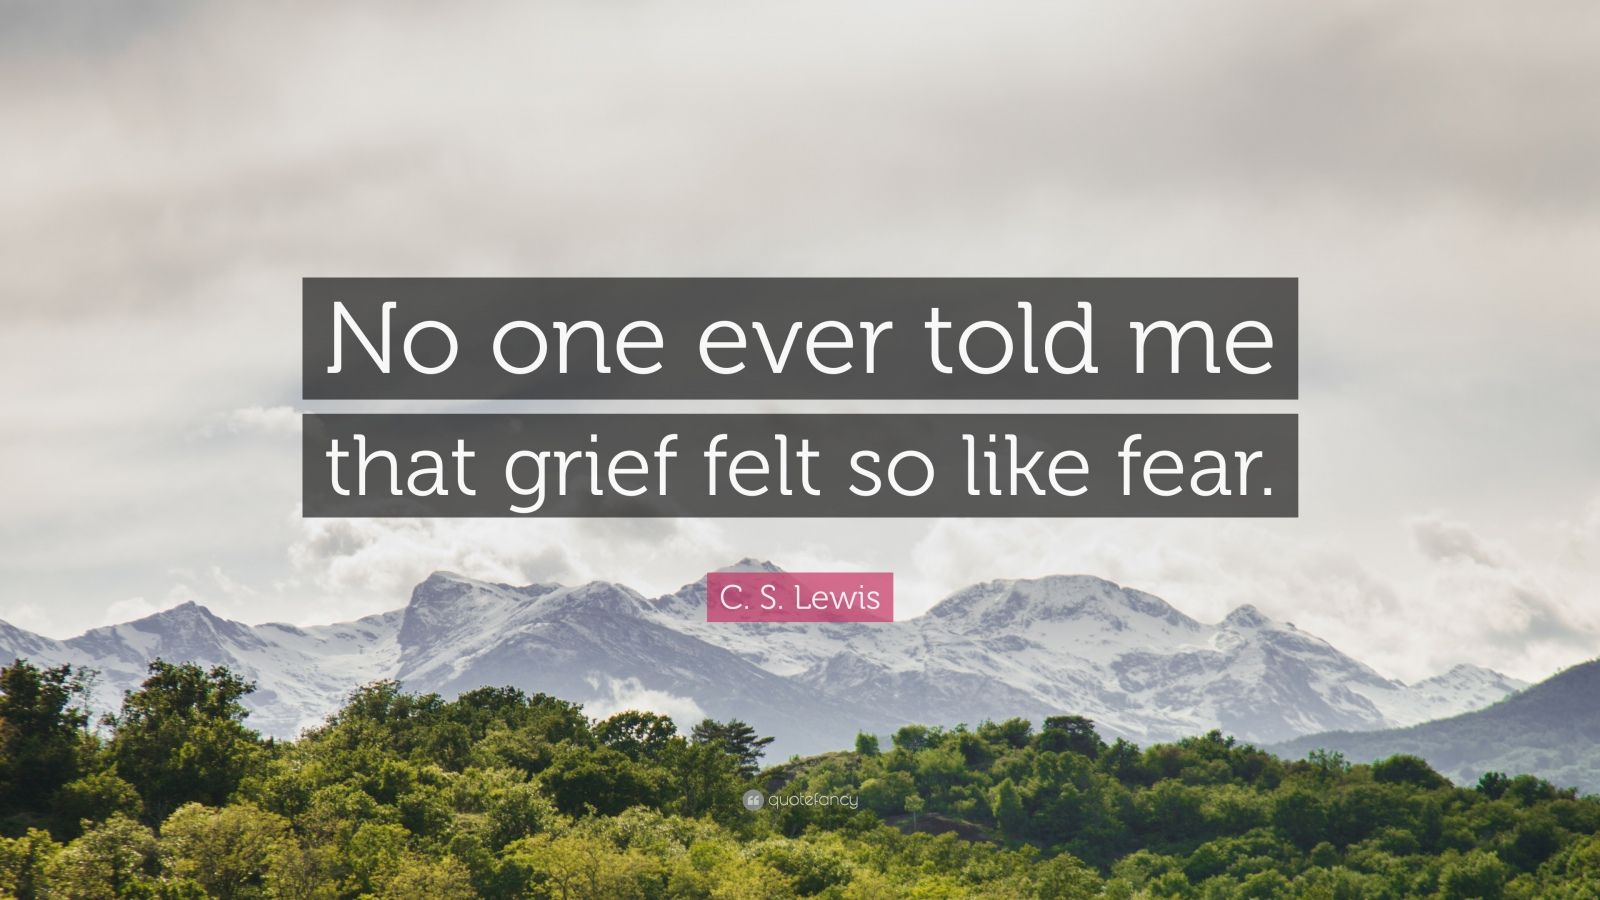 C S Lewis Quote “no One Ever Told Me That Grief Felt So Like Fear”